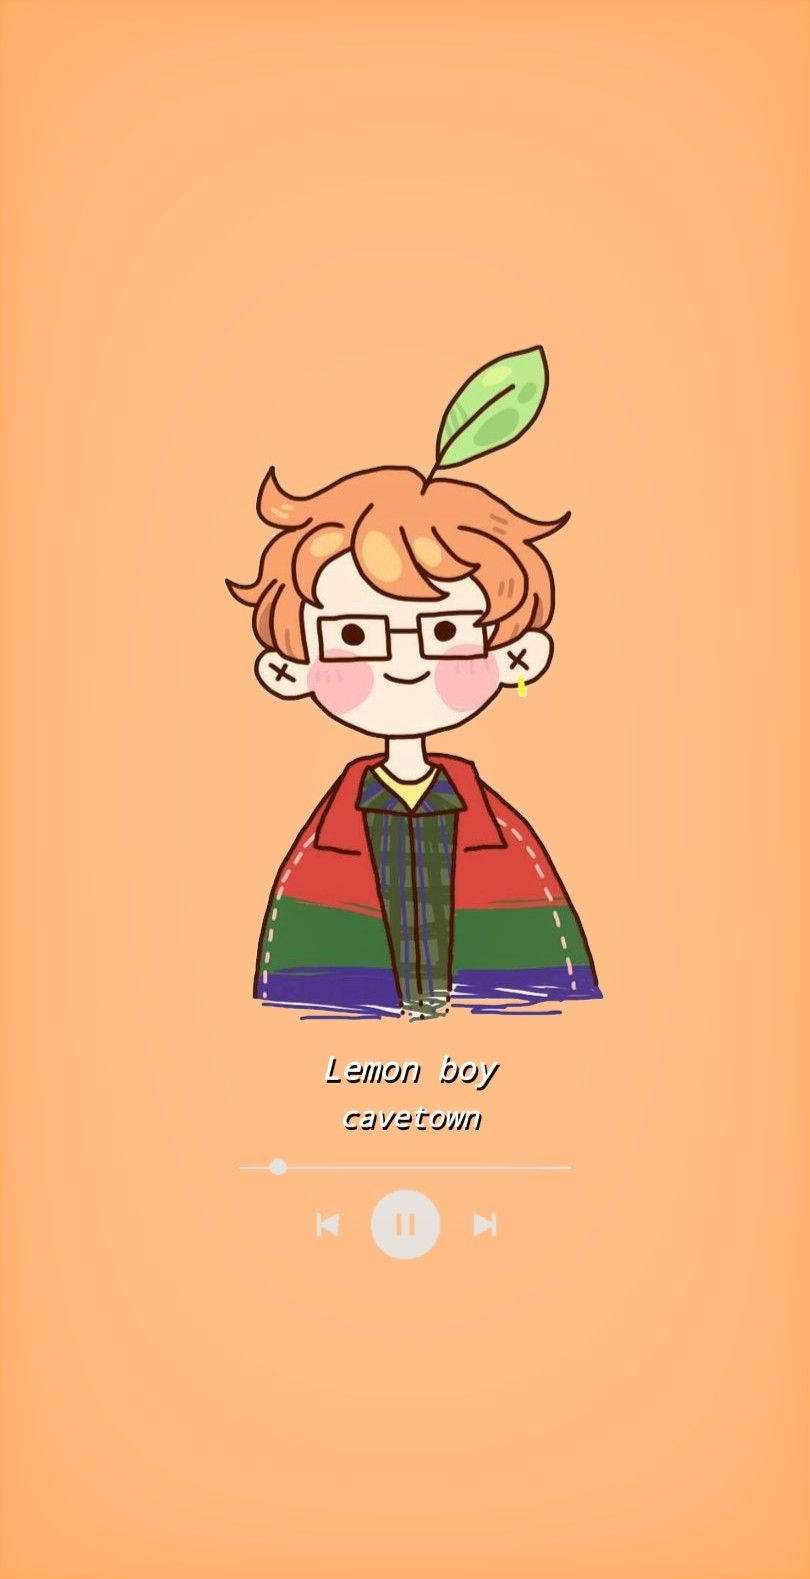 A Cartoon Character With Glasses And A Green Apple Wallpaper